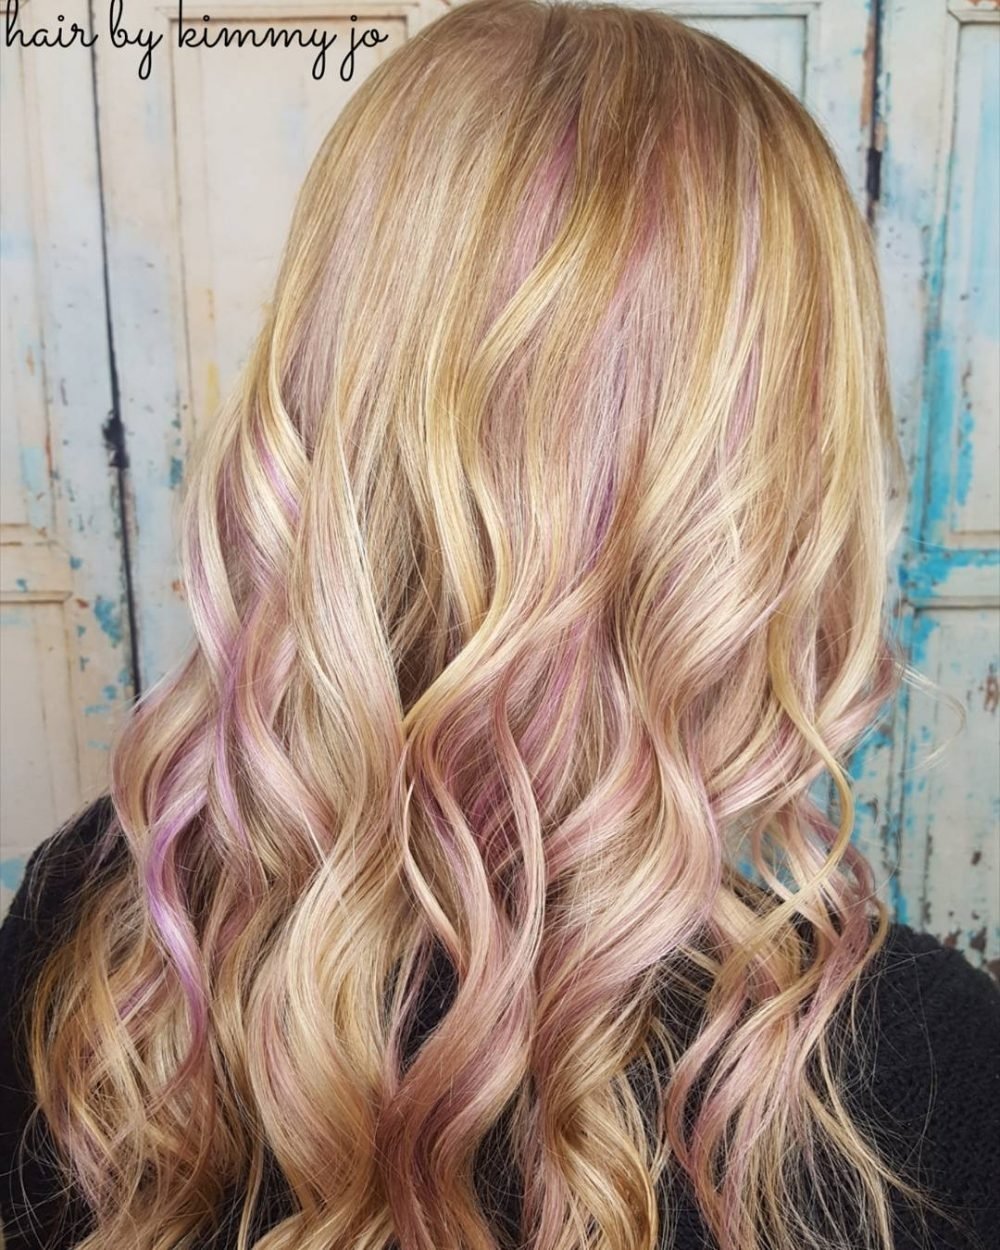 10 Great Hair Color Ideas For Blondes 37 hair color ideas 2018 trends to dye for right now 2022